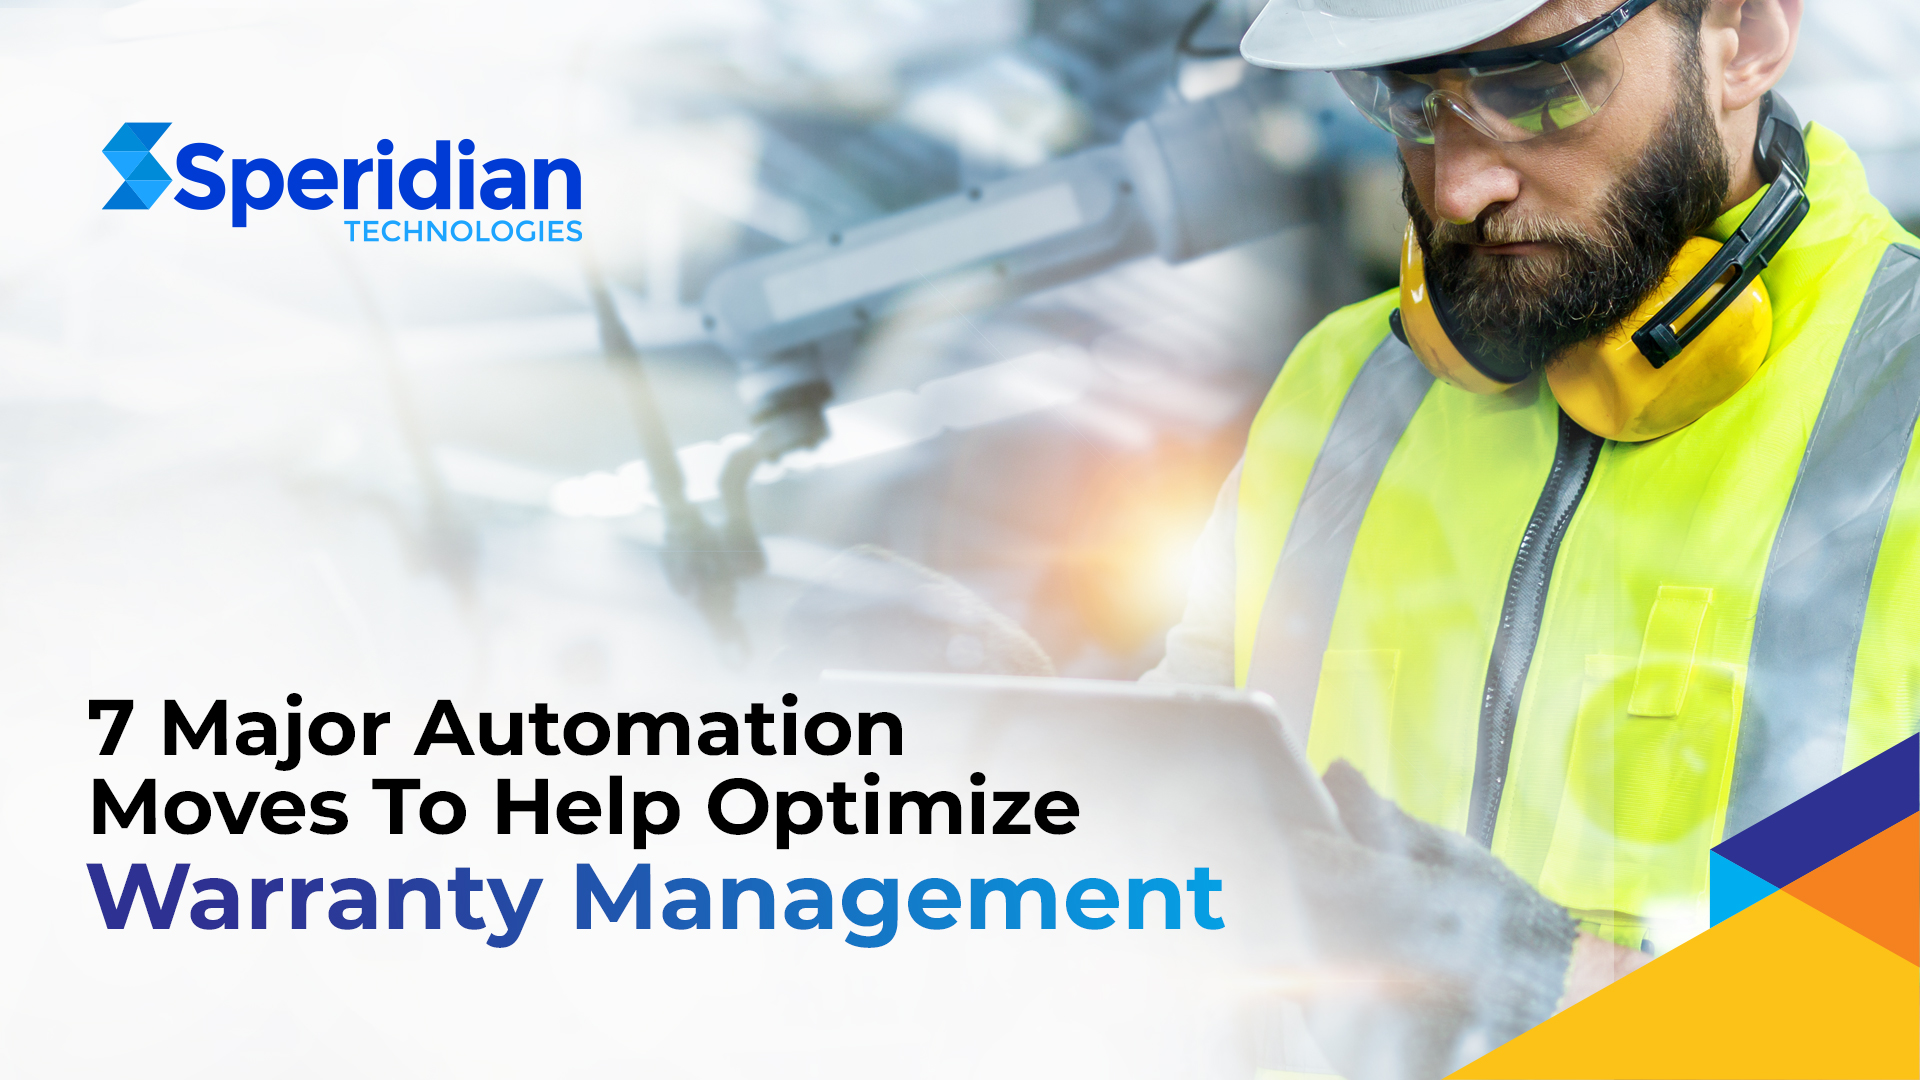 7 Major Automation Moves To Help Optimize Warranty Management